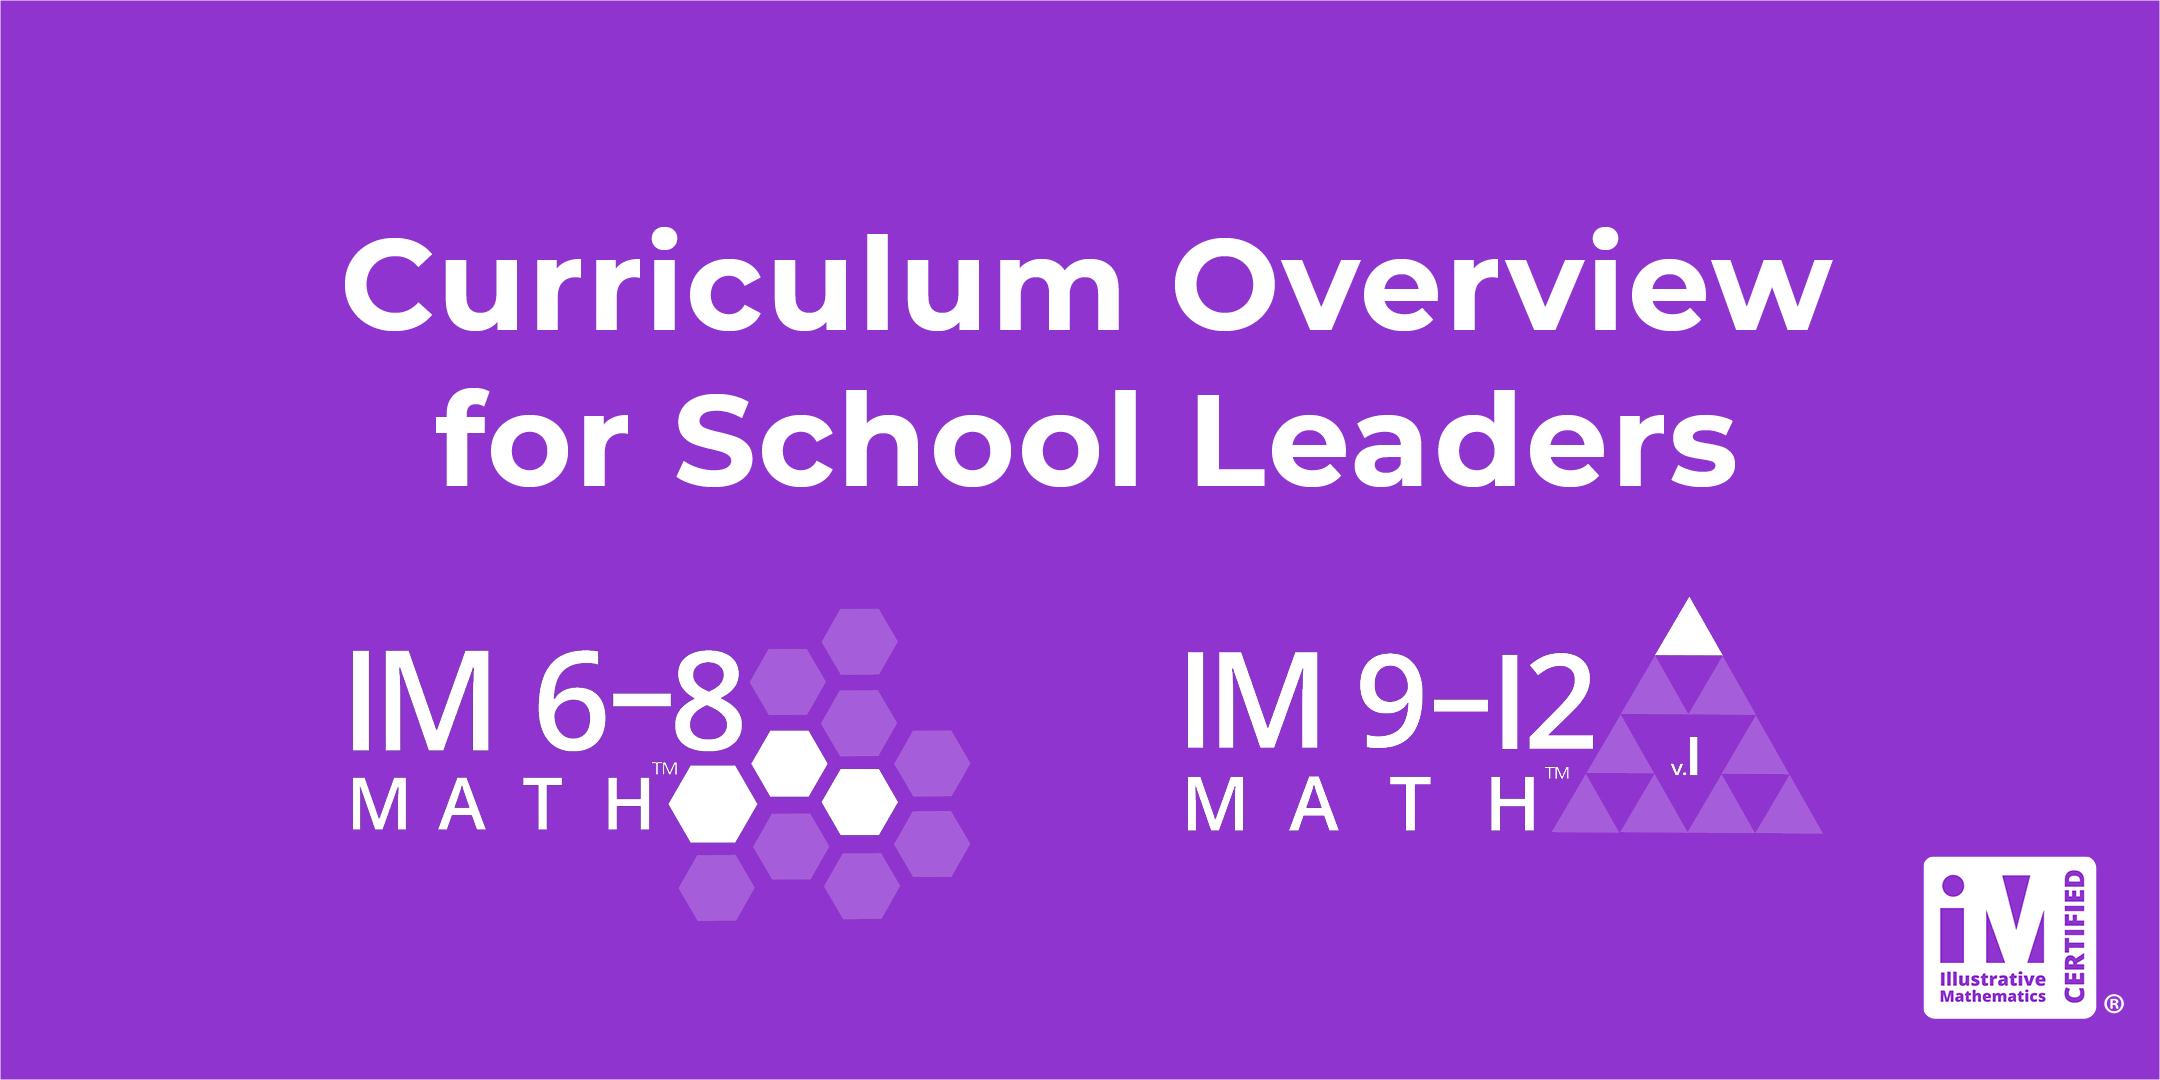 IM Professional Learning for leaders who have adopted IM 6-12 Math